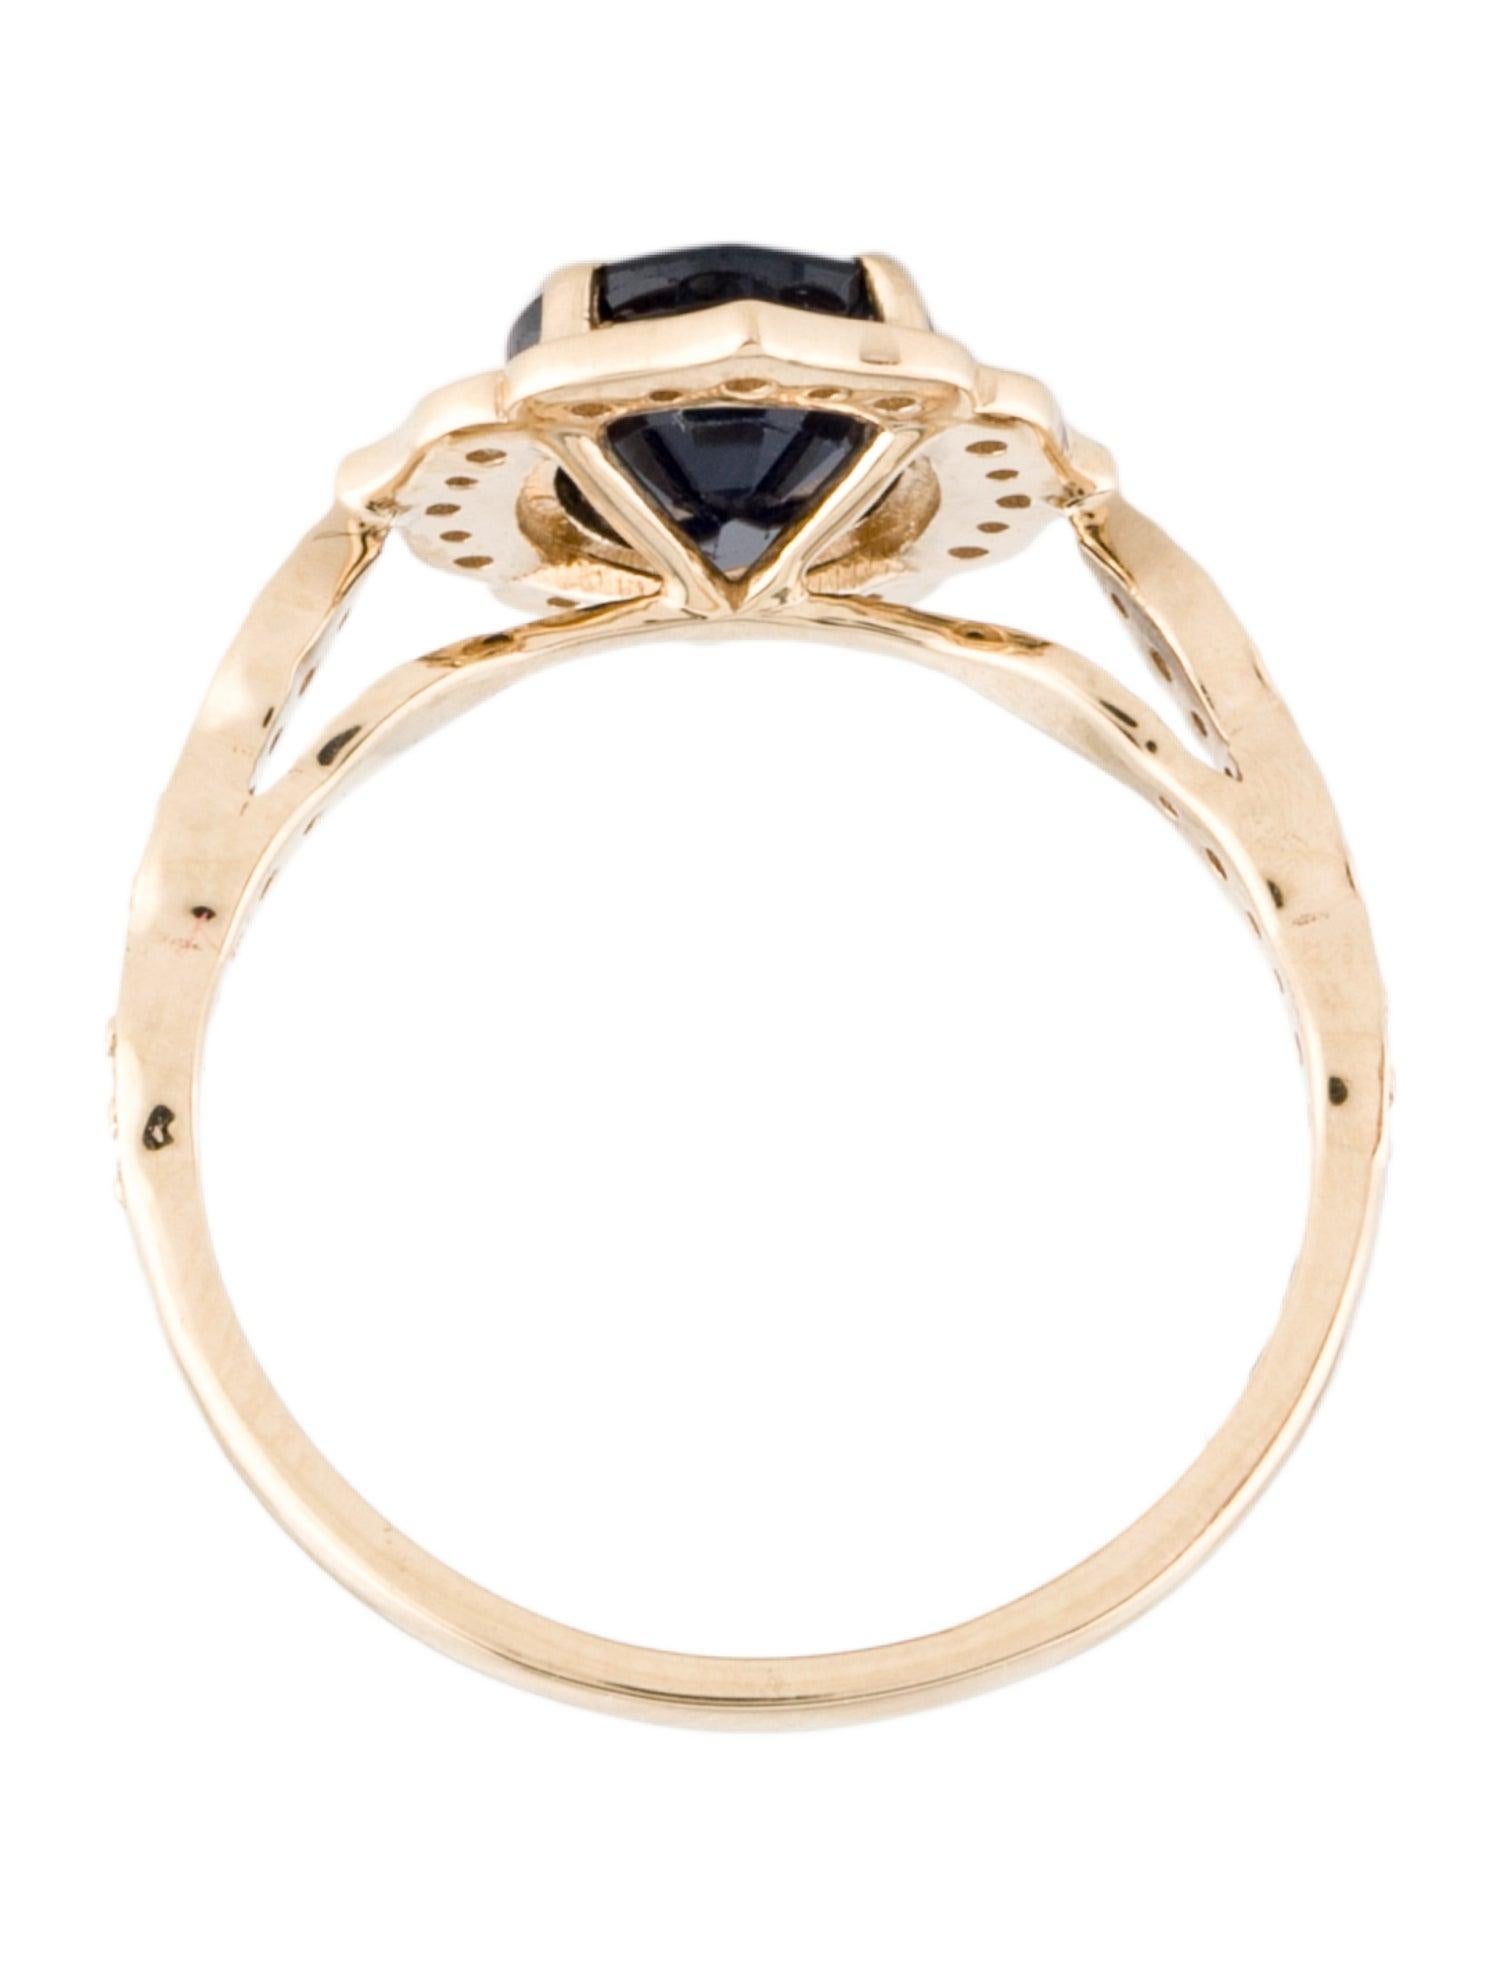 Luxurious 14K Gold Sapphire & Diamond Cocktail Ring Size 6.75 Statement Jewelry In New Condition For Sale In Holtsville, NY